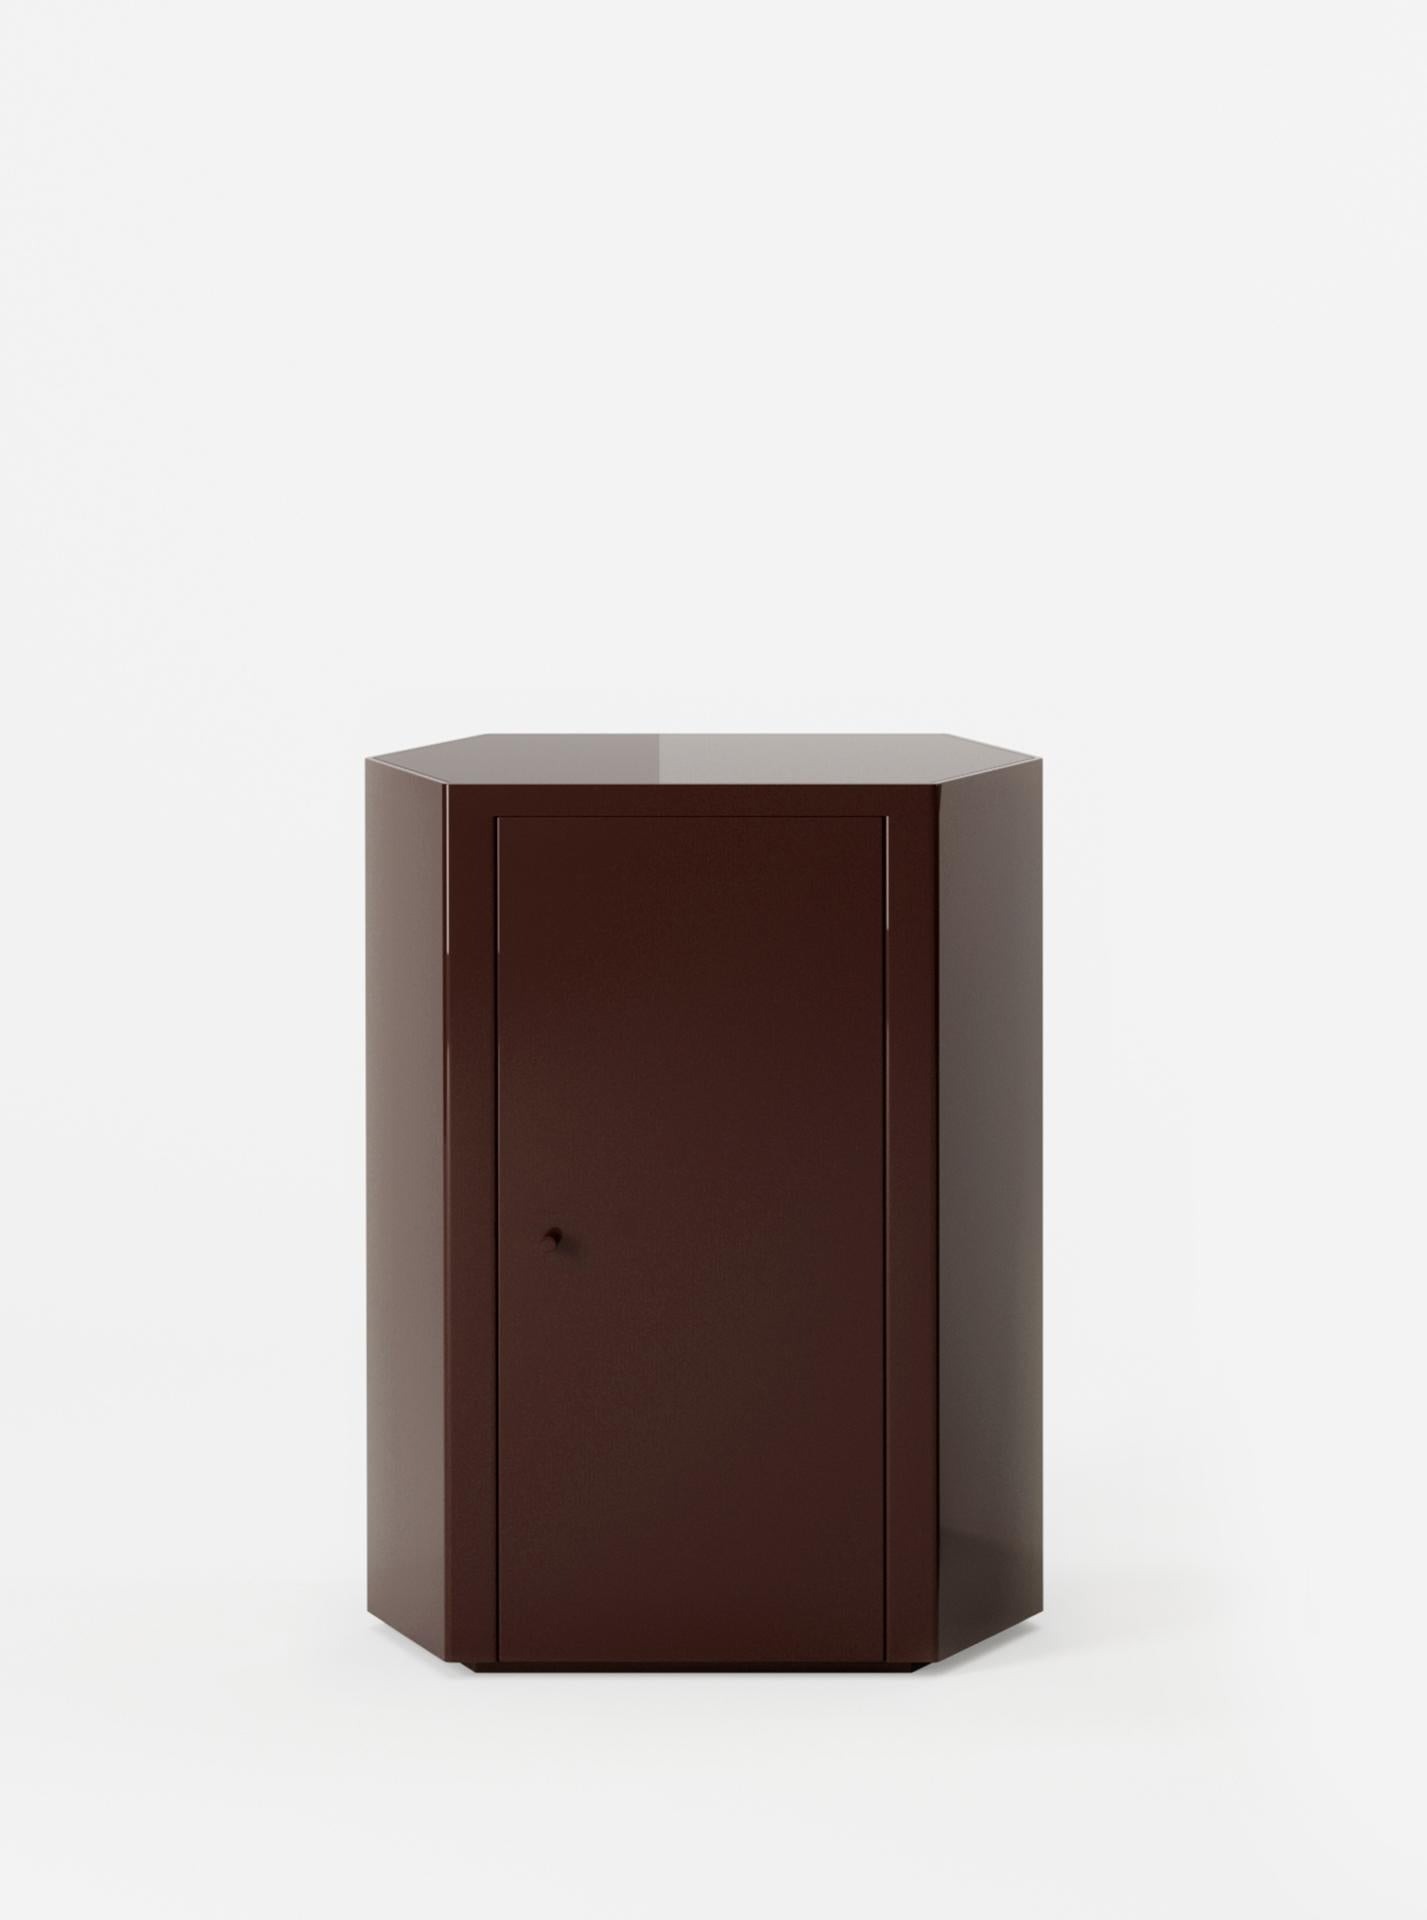 Minimalist Pair of Park Night Stands in Espresso Brown Lacquer by Yaniv Chen for Lemon For Sale